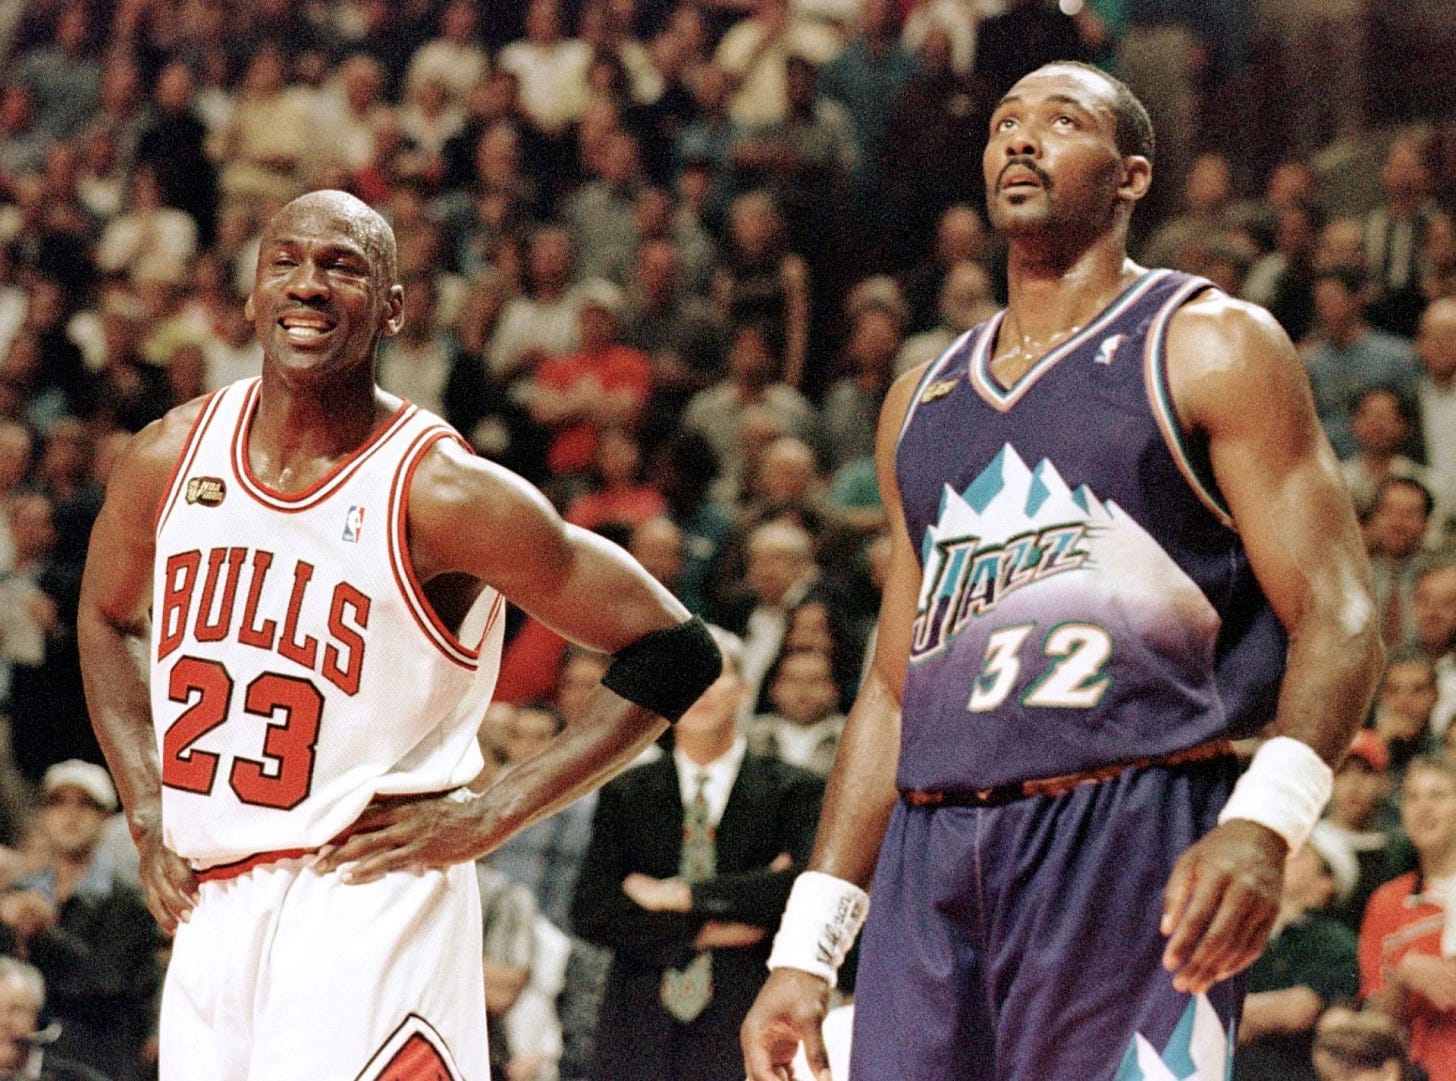 In 1998, a smiling Michael Jordan in a white Bulls uniform, hands on hips, stands beside a concerned-looking Karl Malone in a purple Jazz uniform, against the backdrop of blurry fans in arena seating.